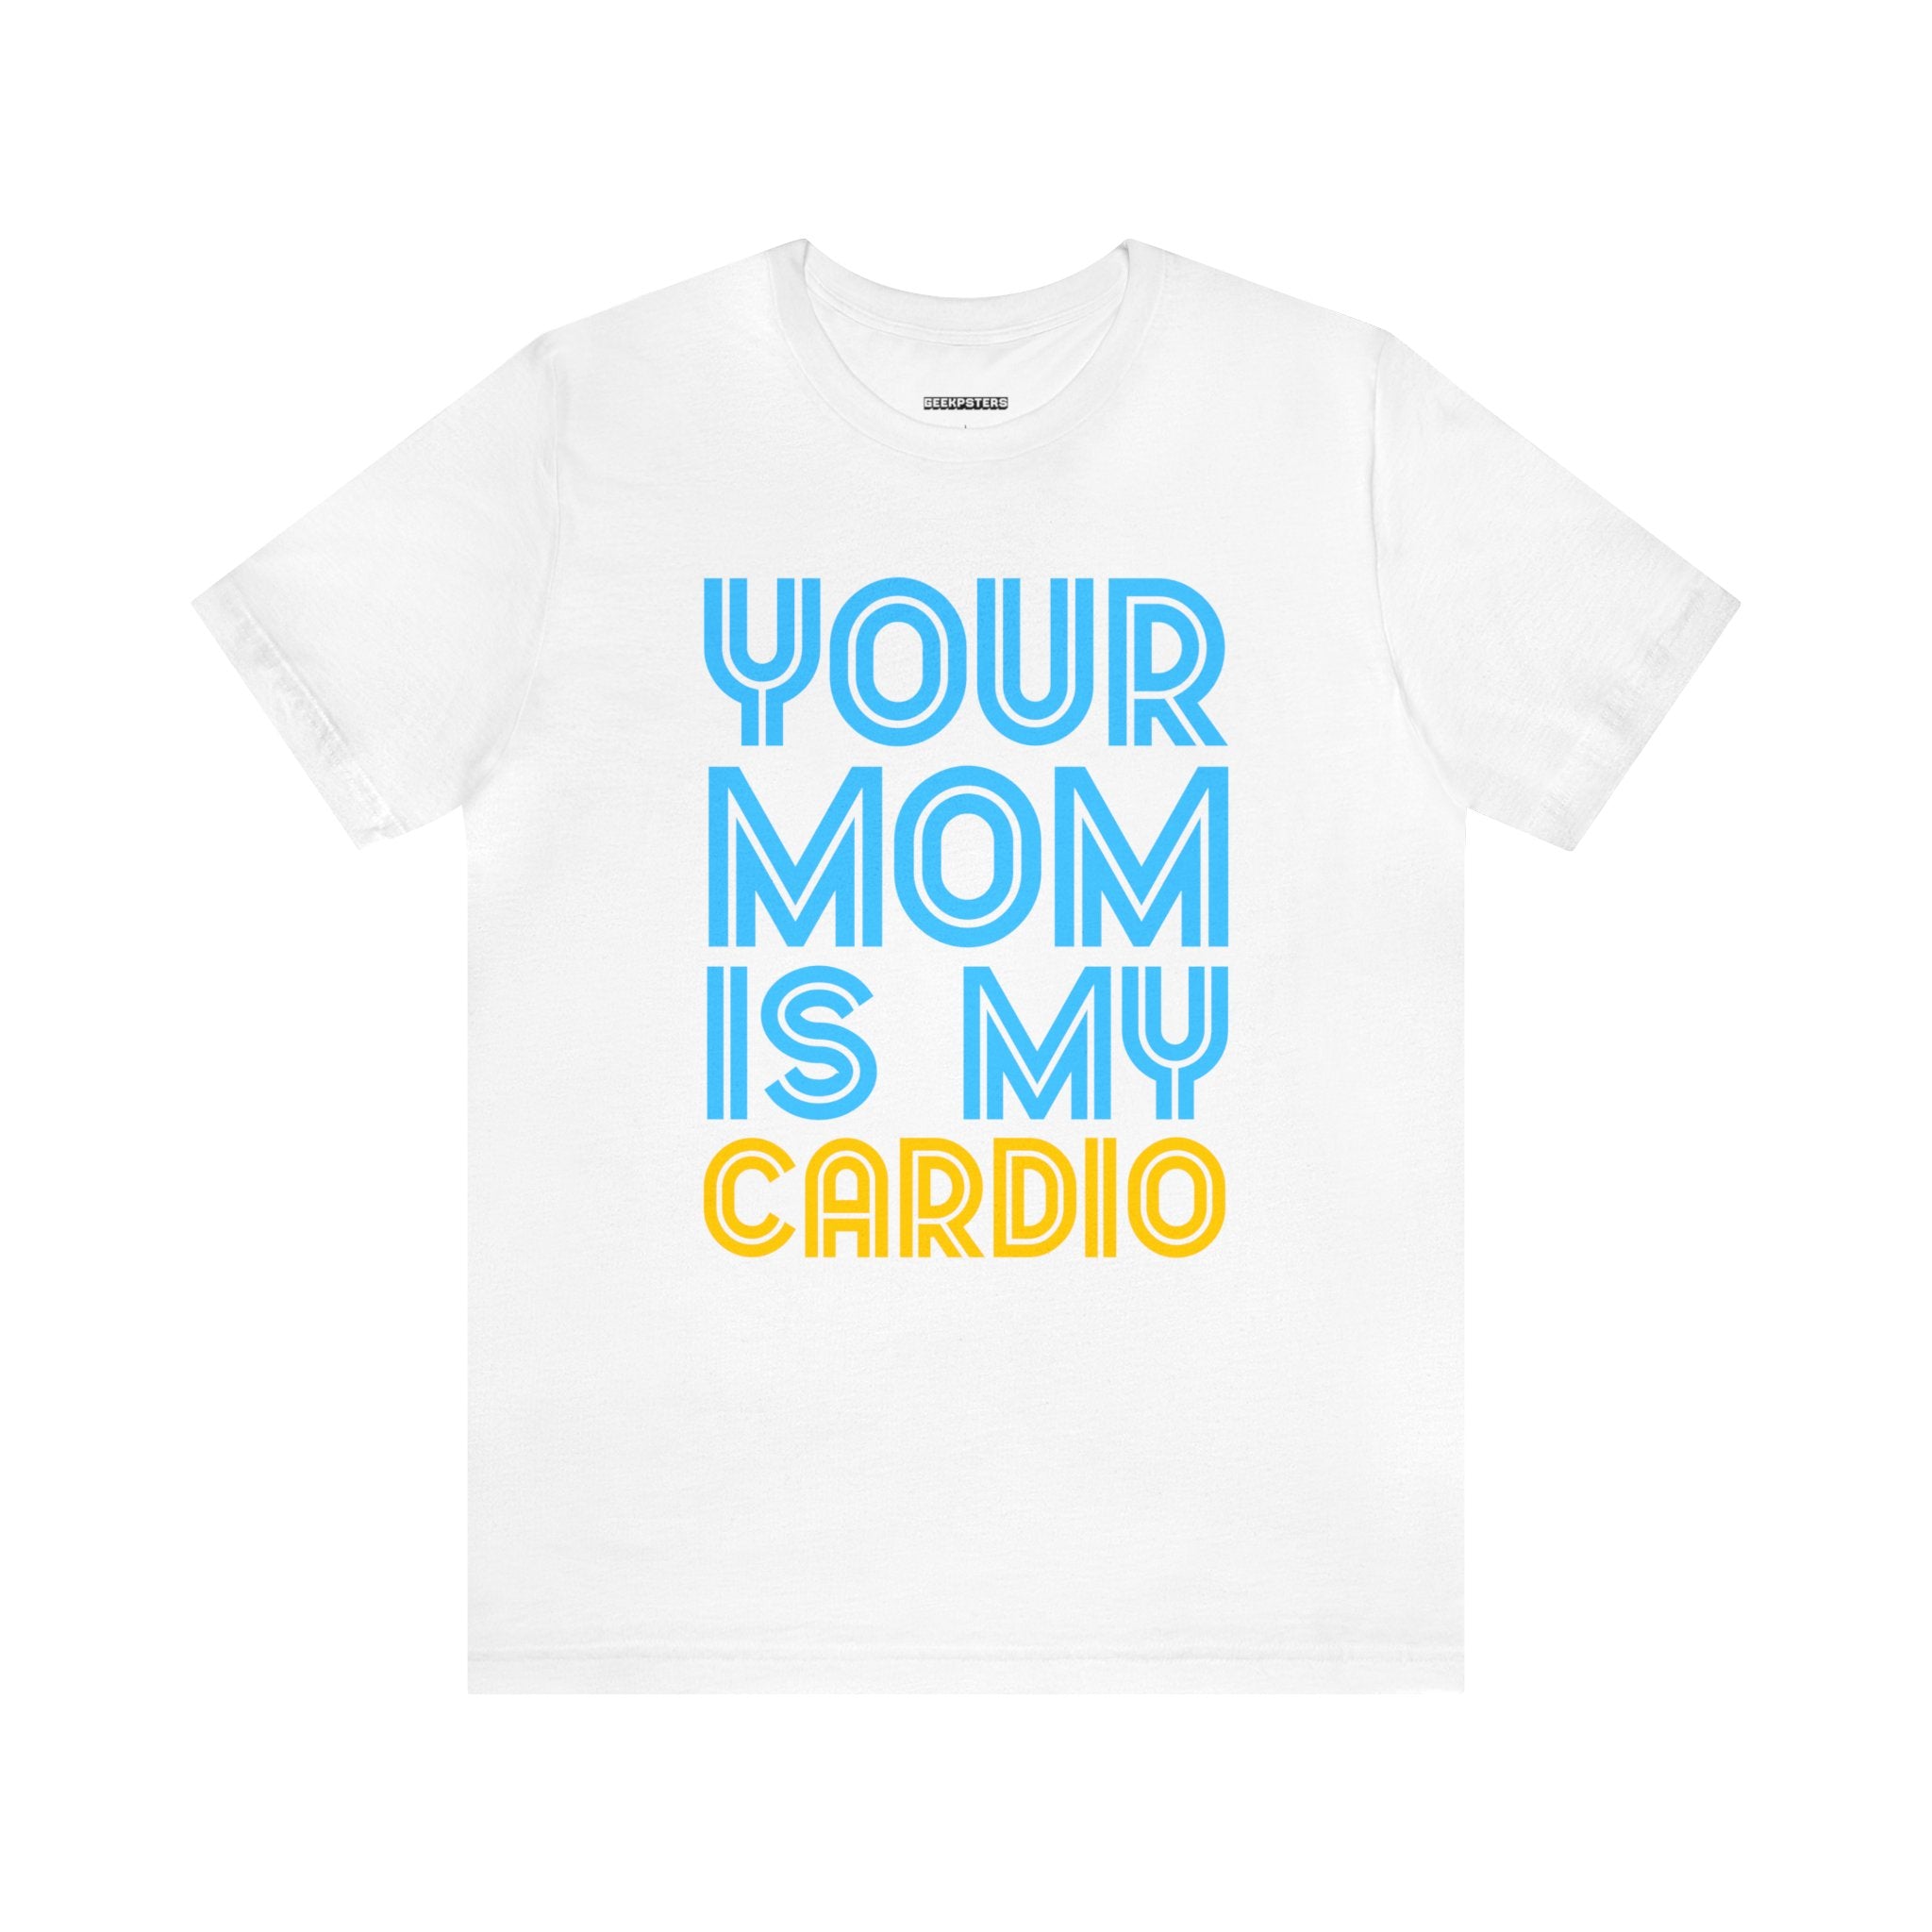 Waiting for your Your Mother Is My Cardio T-Shirt is my cardio.